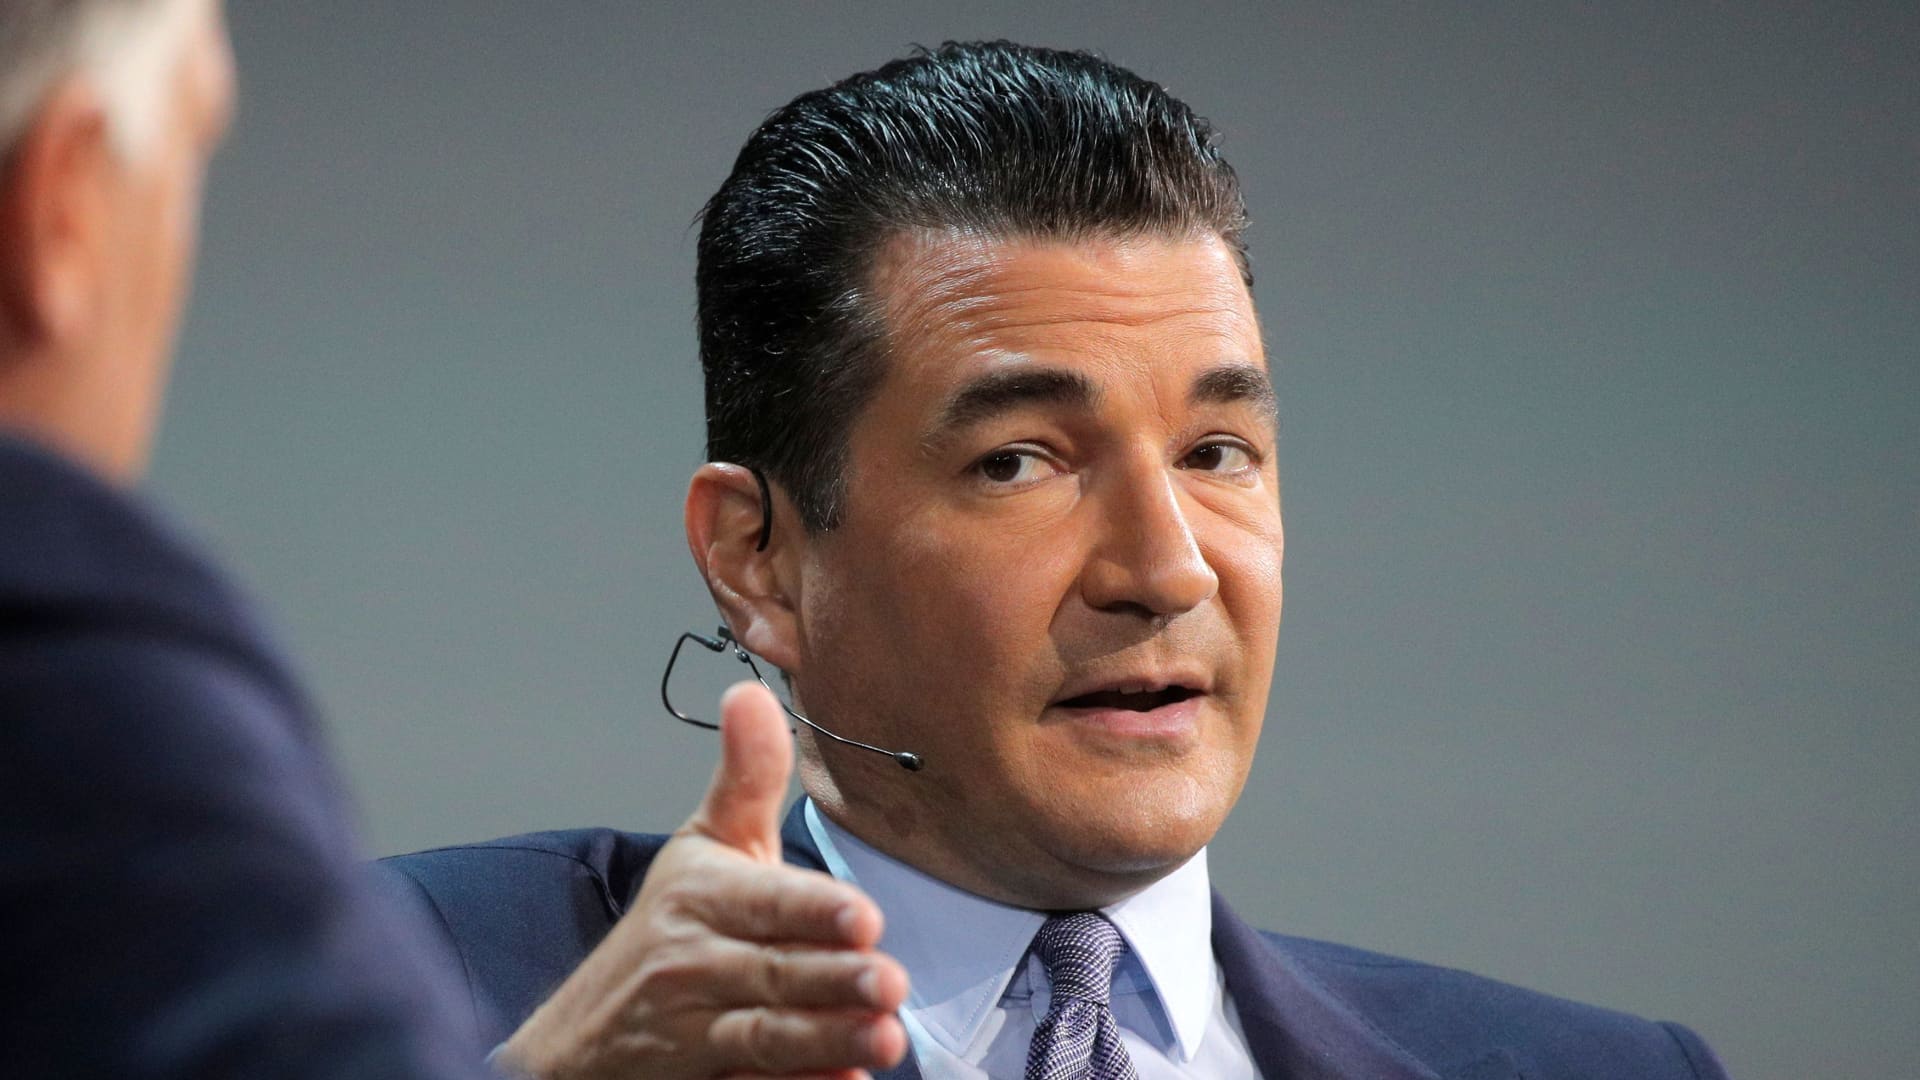 Dr. Scott Gottlieb believes omicron BA.2 subvariant unlikely to cause 'national wave' in U.S.